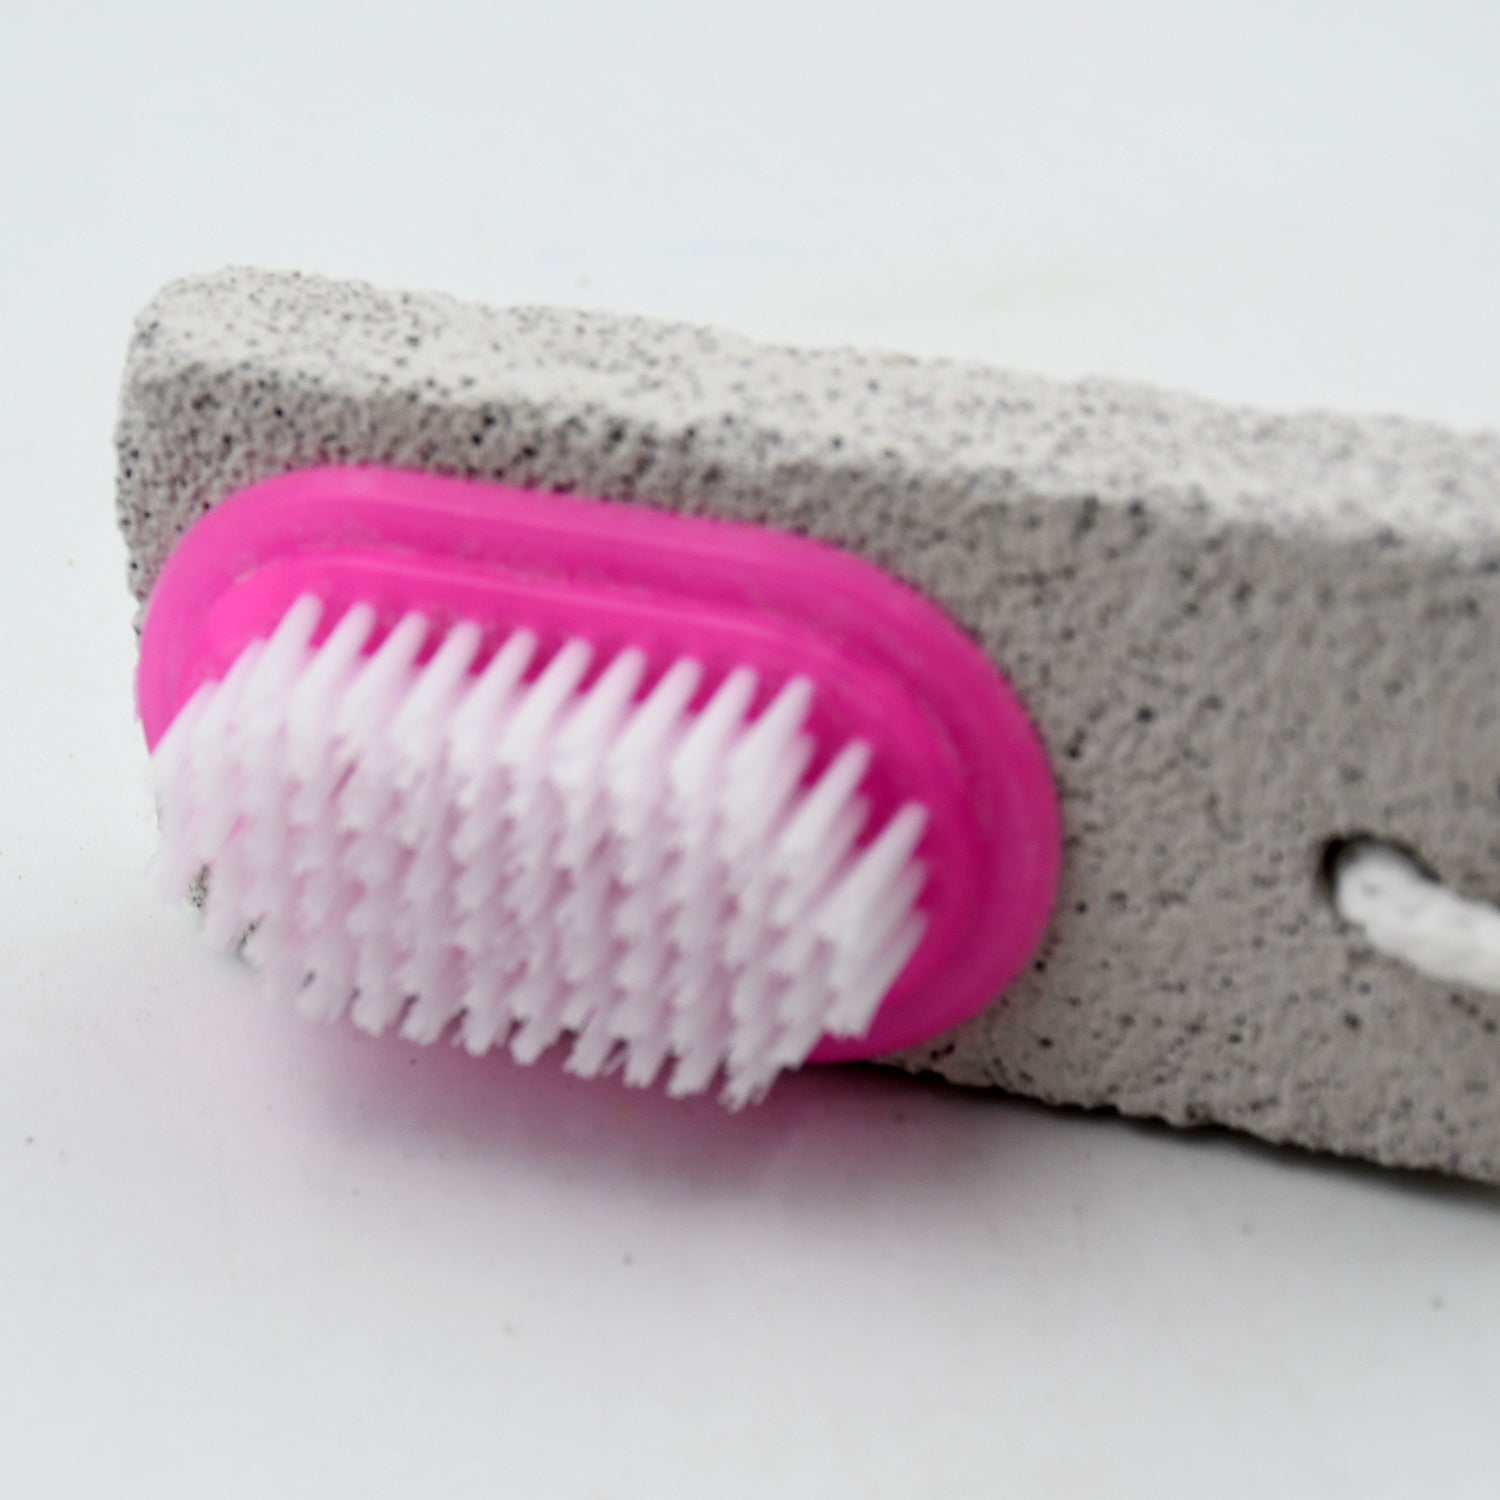 9352 Hand and Foot Brush with pumice stone to Remove Dead Skin & Callus Stone Foot Scrubber Pedicure Brush For Dead Skin